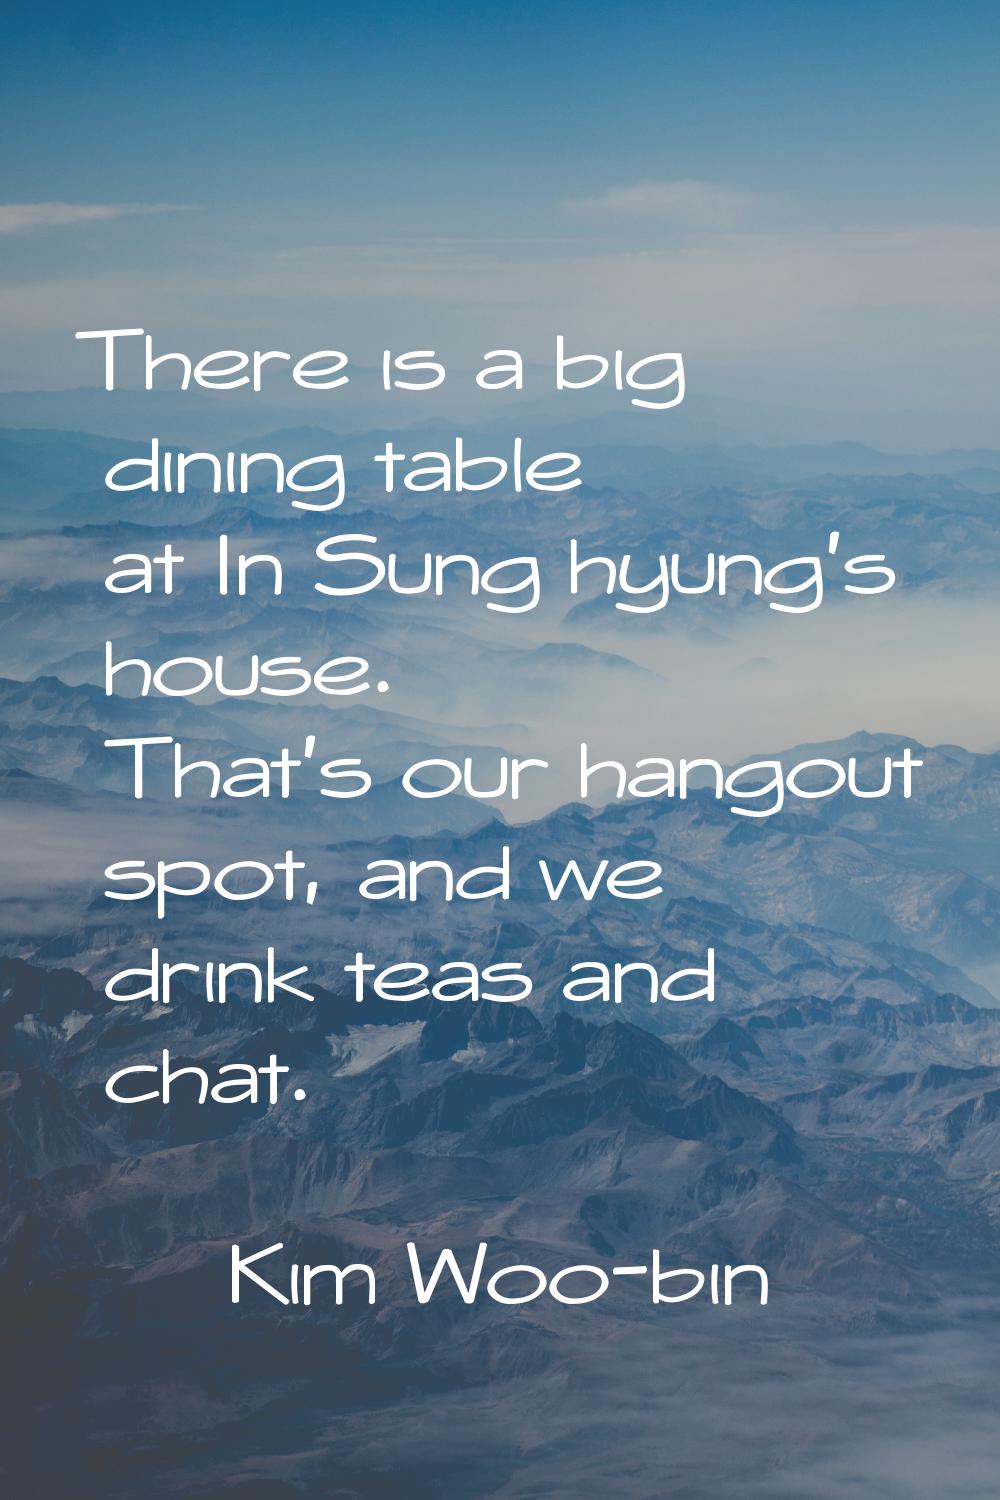 There is a big dining table at In Sung hyung's house. That's our hangout spot, and we drink teas an